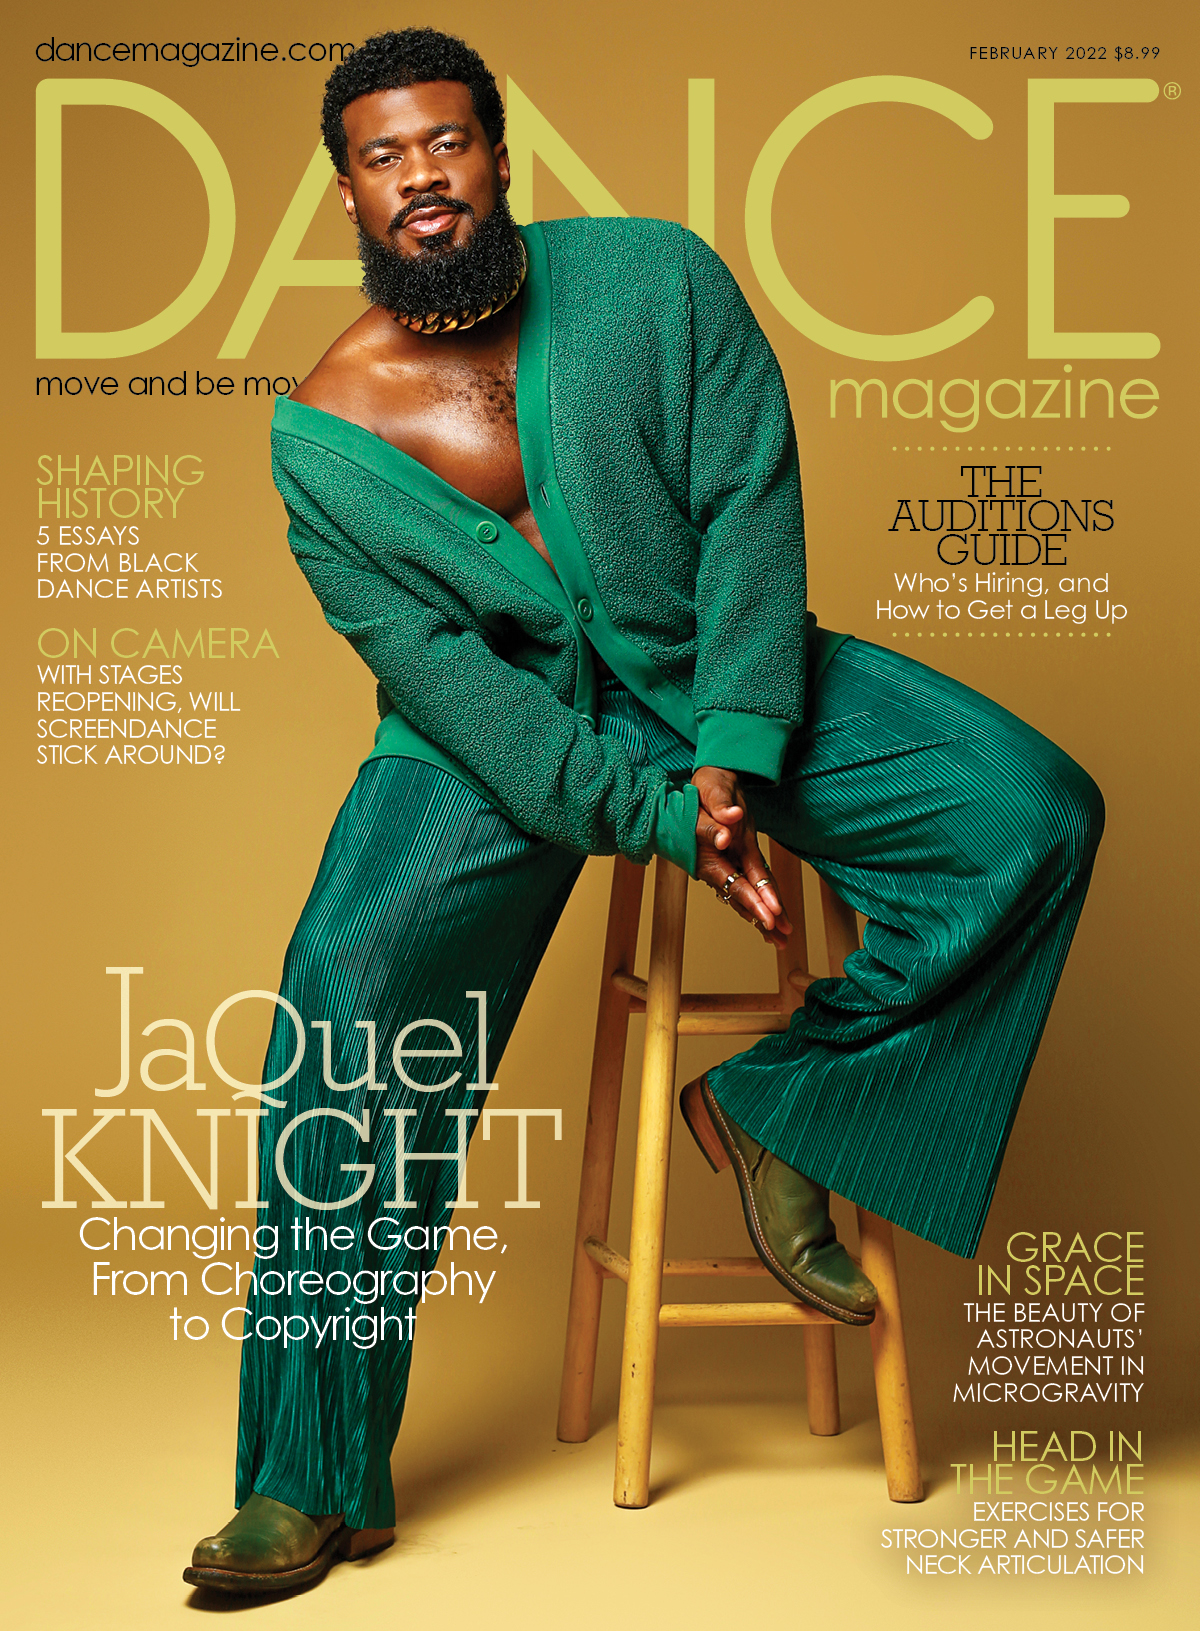 Dance Magazine cover image showing Jaquel Knight in a green jumpsuit leaning to the side on a chair.